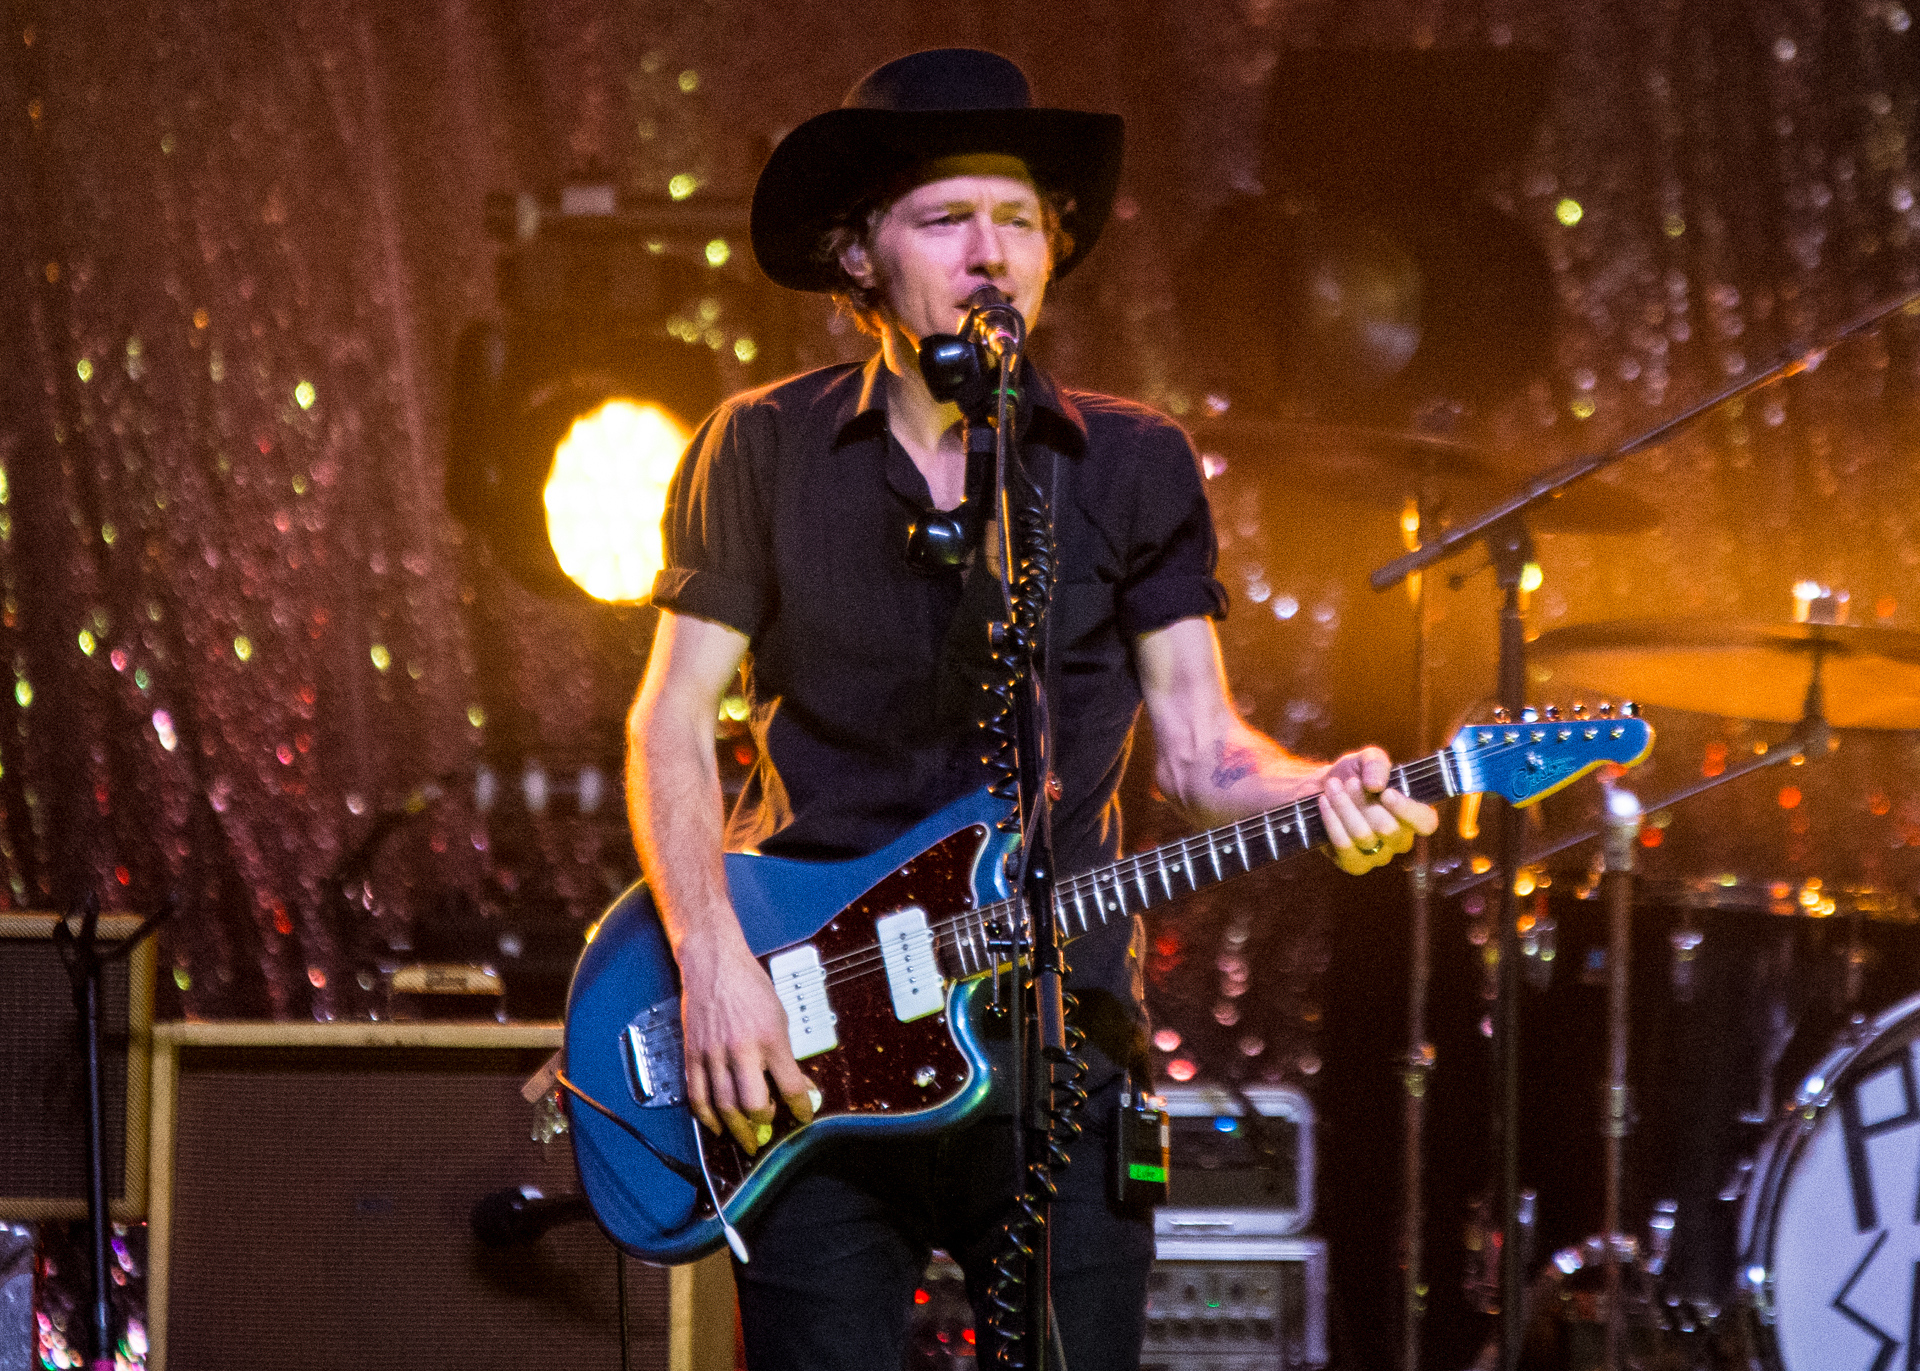 Luke Doucet, sporting a cowboy hat, commands the stage, holding his blue electric guitar and singing into the microphone. The spotlight illuminates him against a sparkly backdrop, creating a visually striking and dynamic presence that captures the essence of his performance.